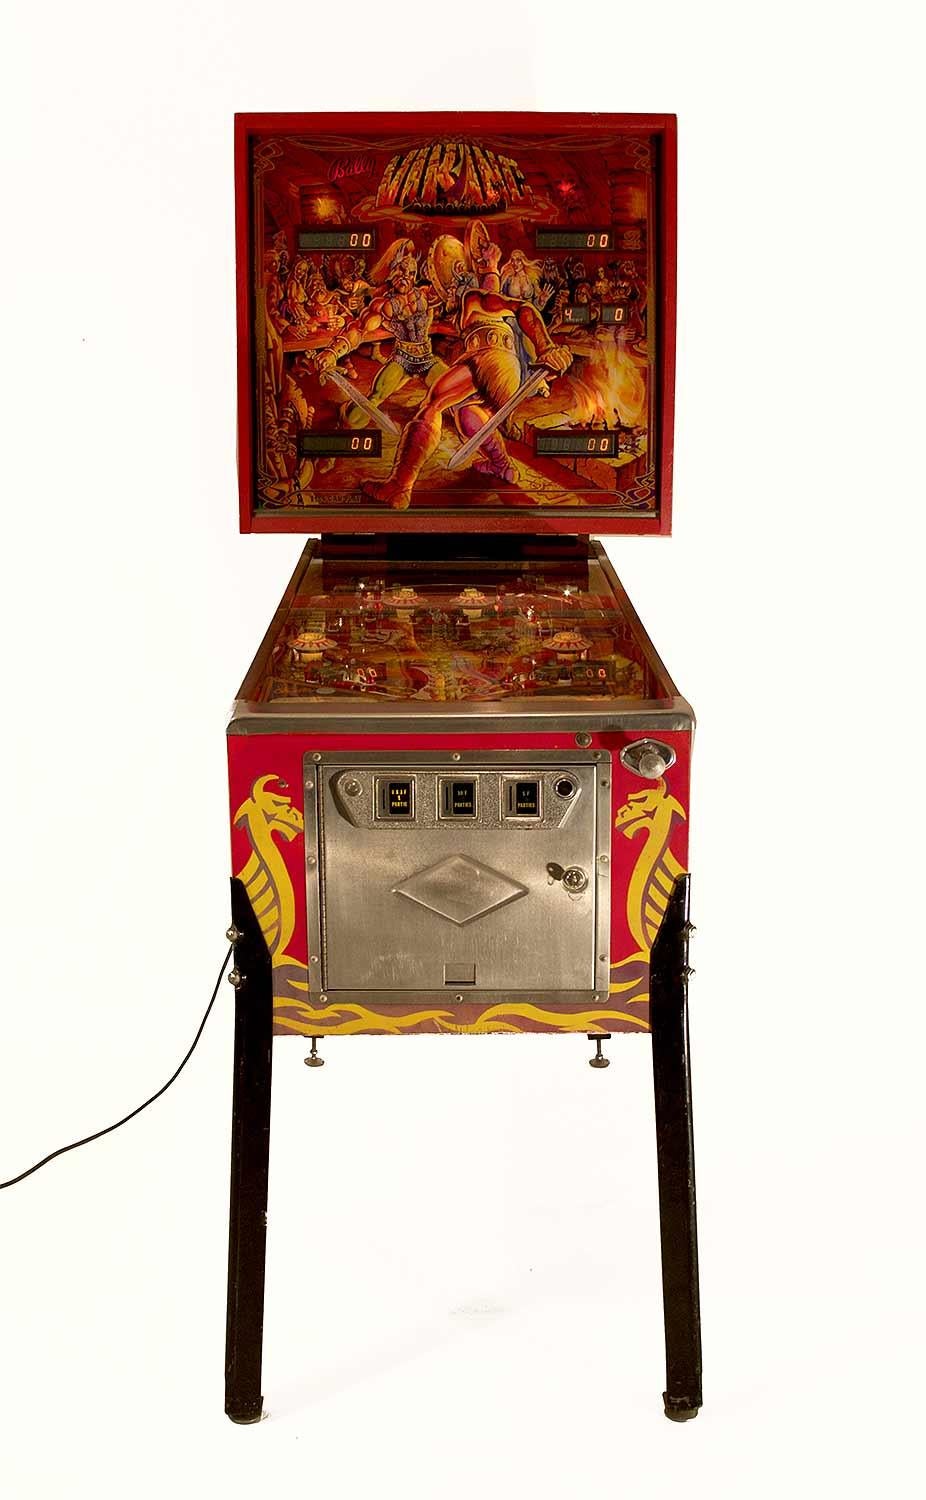 Viking Pinball by Bally in red painted wood with yellow patterns representing on each side a Viking with a helmet holding his sword and his shield. 
On the main screen, two characters are fighting and the character on the left is a self-portrait of